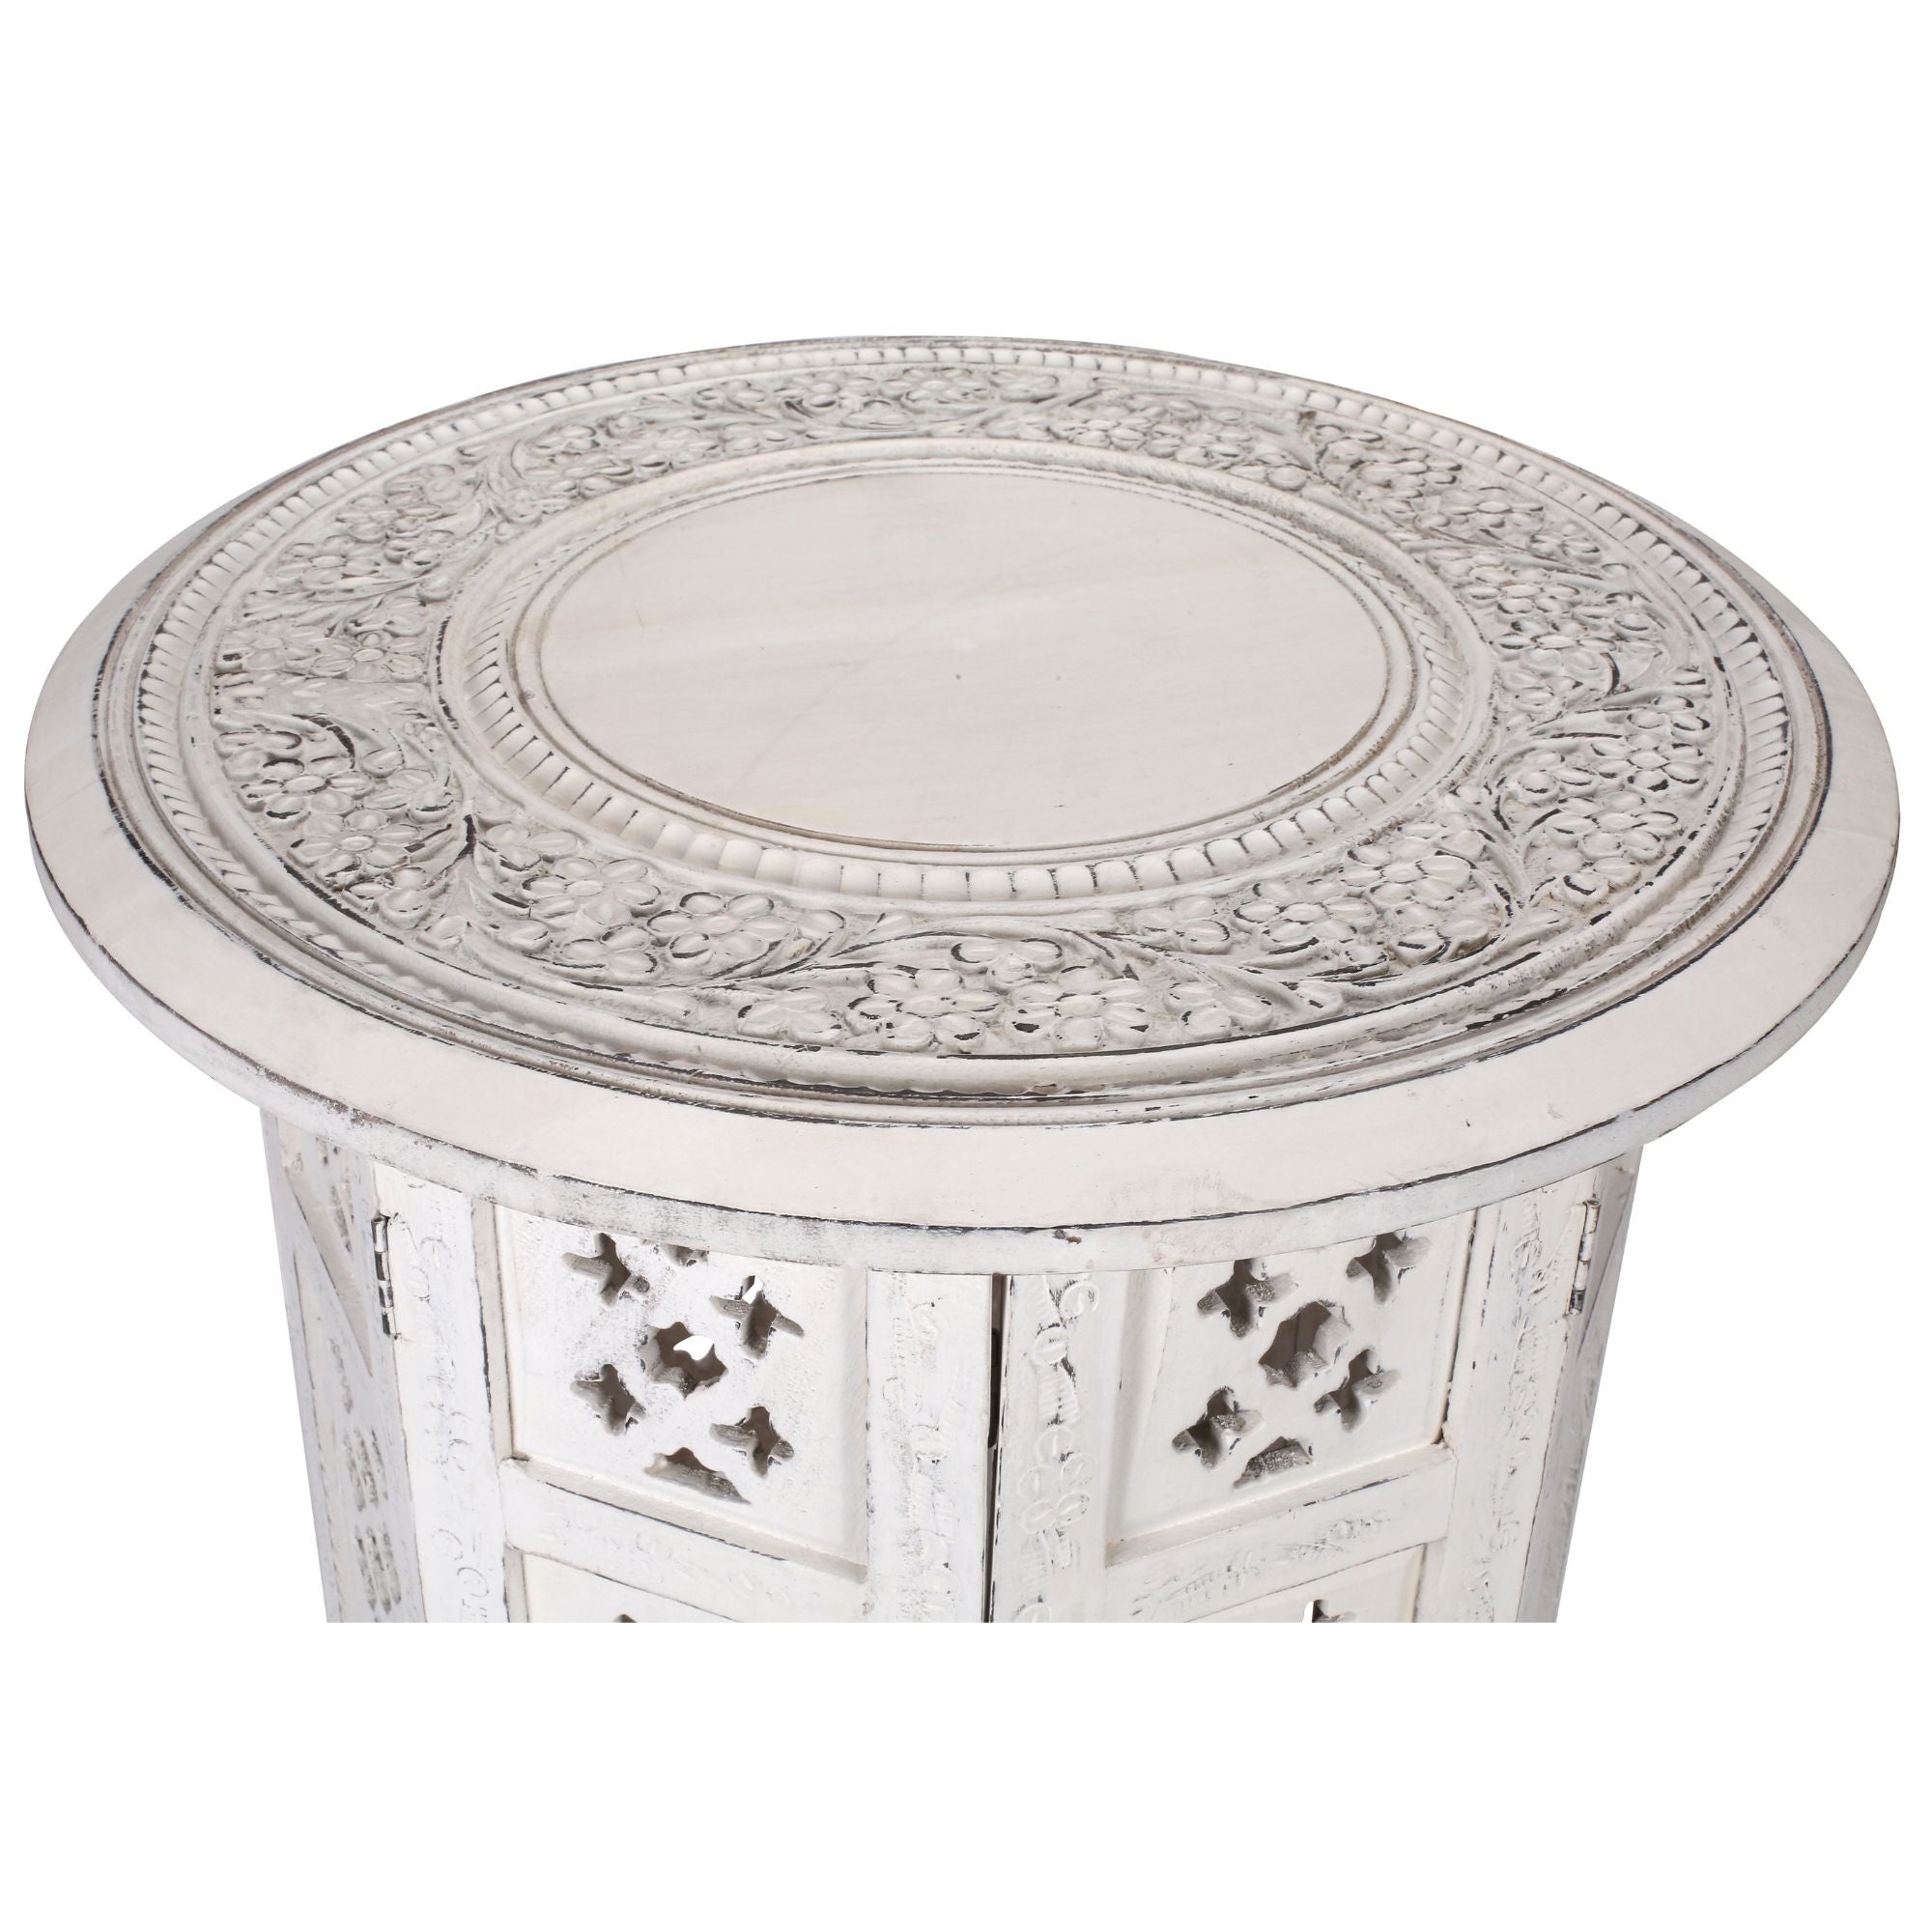 Rubber Wood Timber Round 45Cm Side Table - White